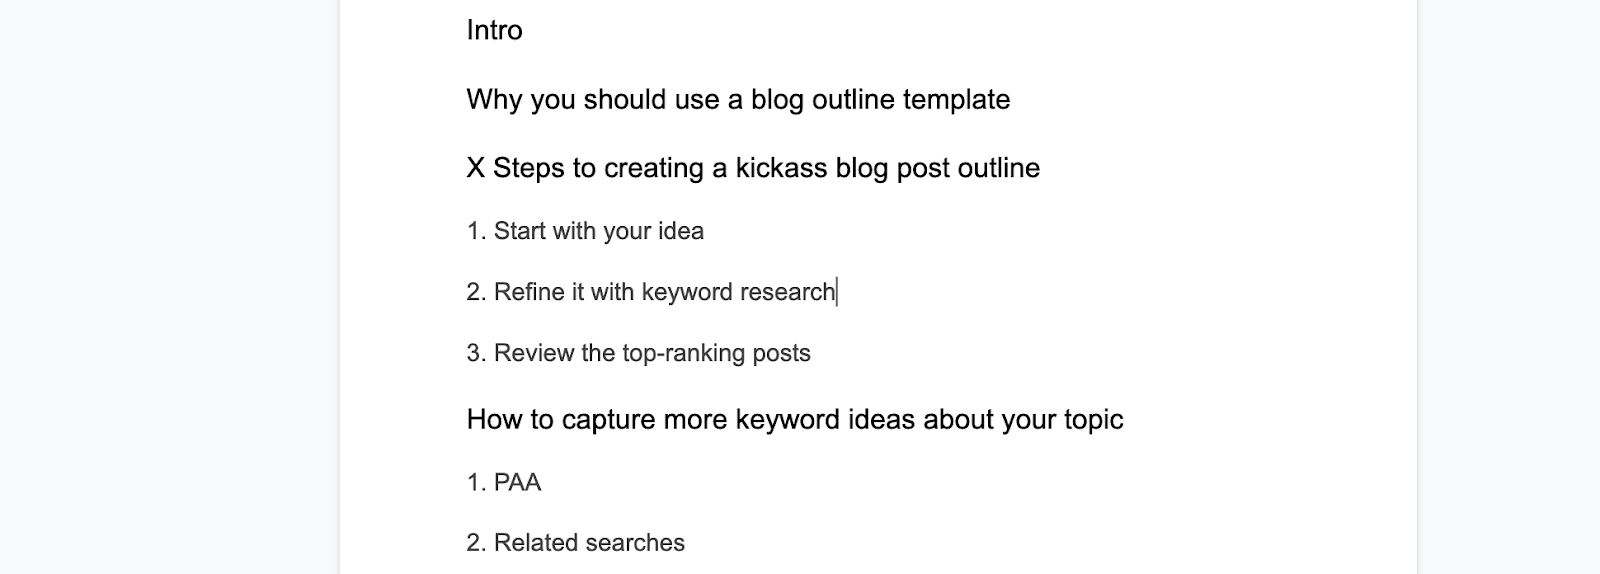 my google doc outline for this blog outline template post